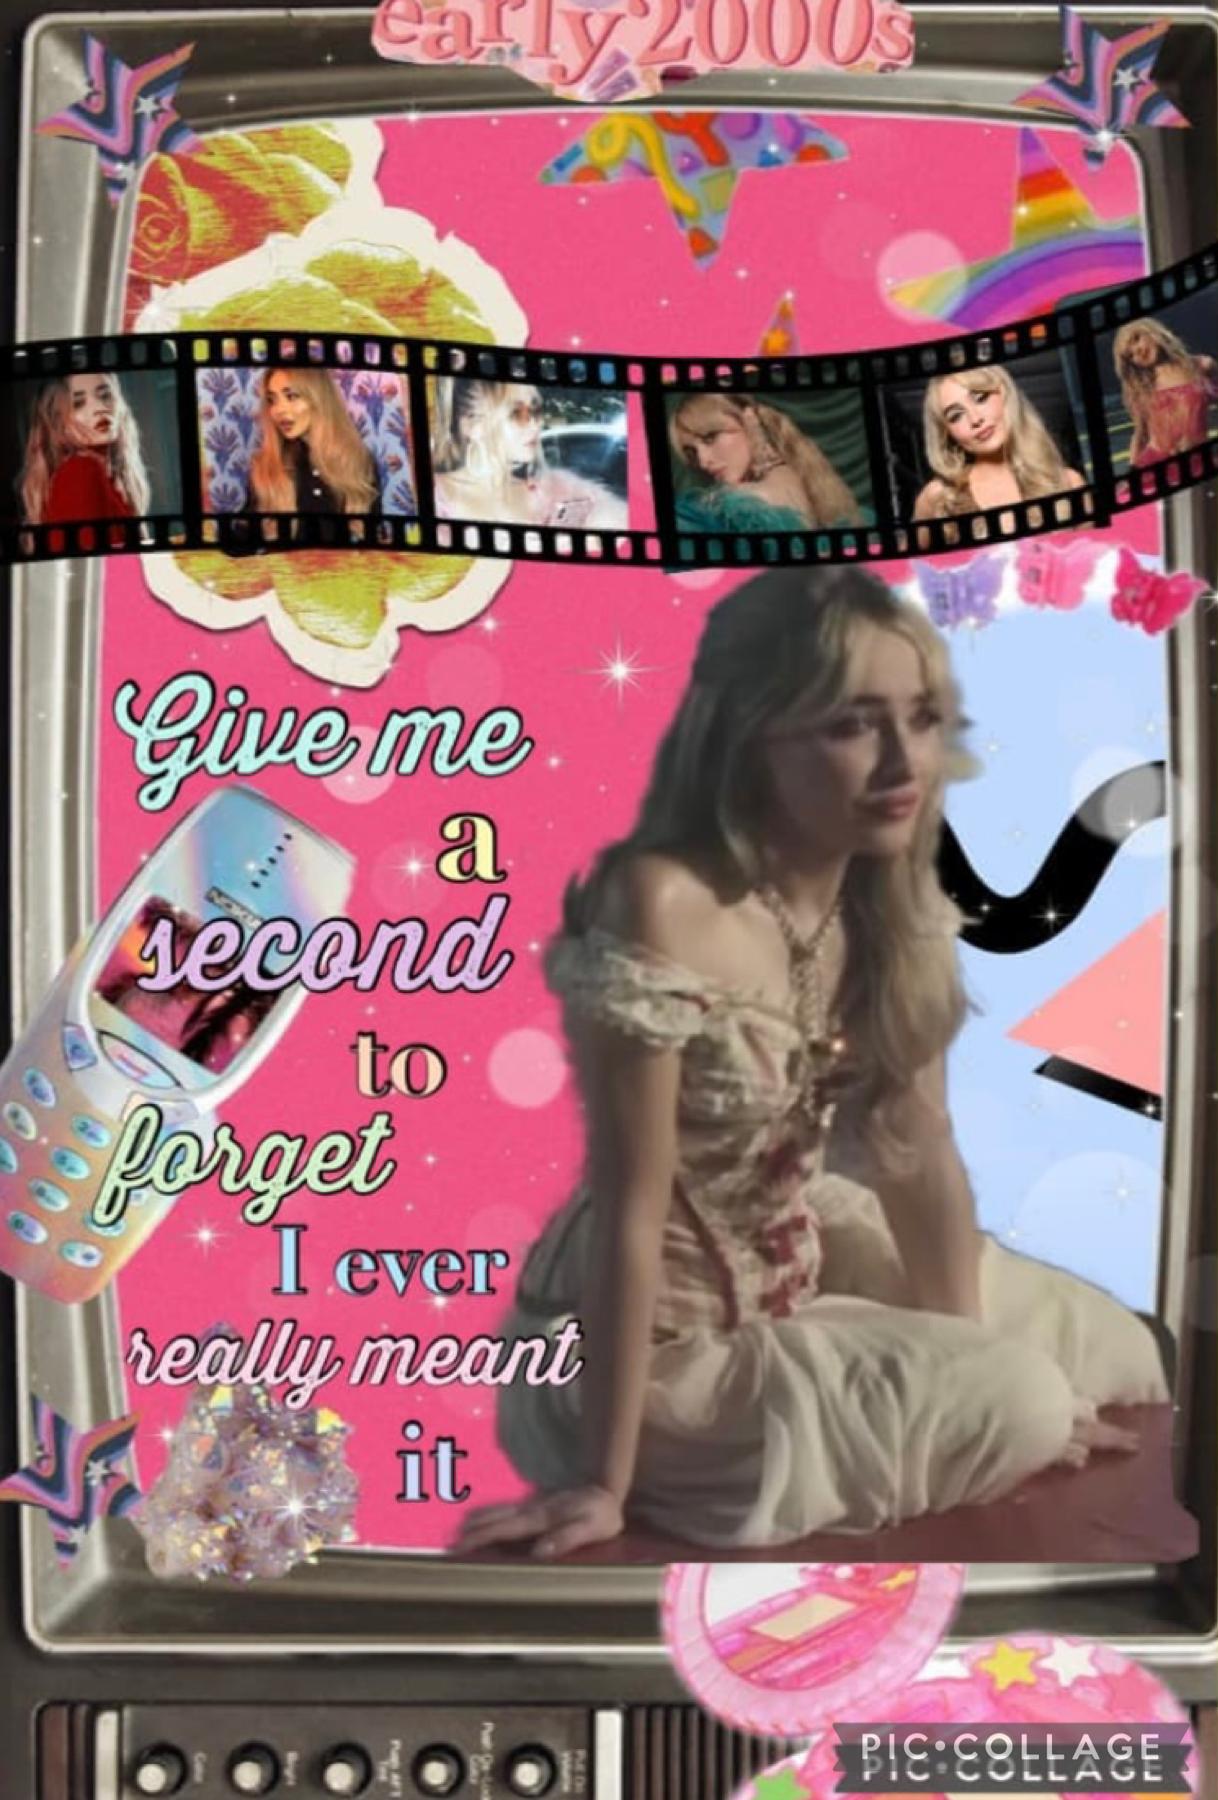 ✨Collab with…✨
The amazing Breathin_Dreams
This was so fun to create I would love to collab again in the future!
(Retro Sabrina carpenter collage)